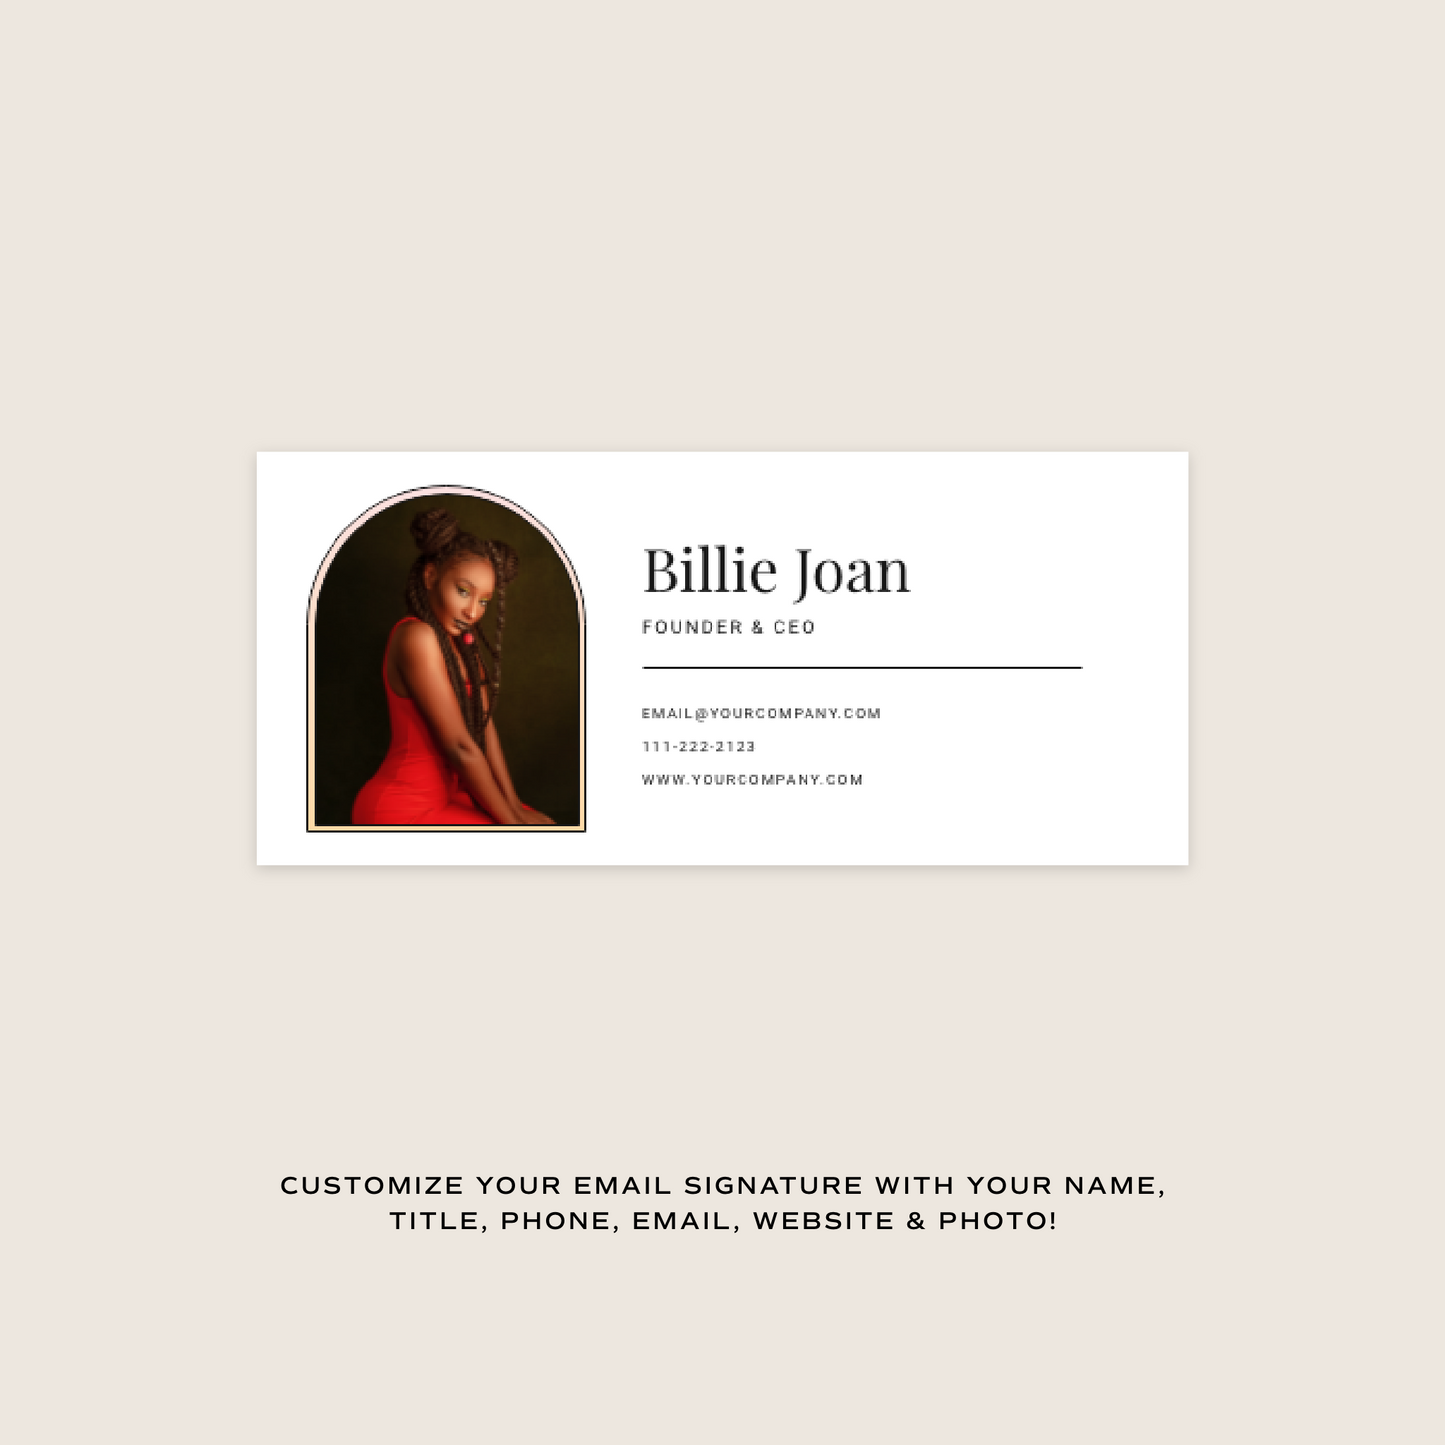 Billie Email Signature Collection